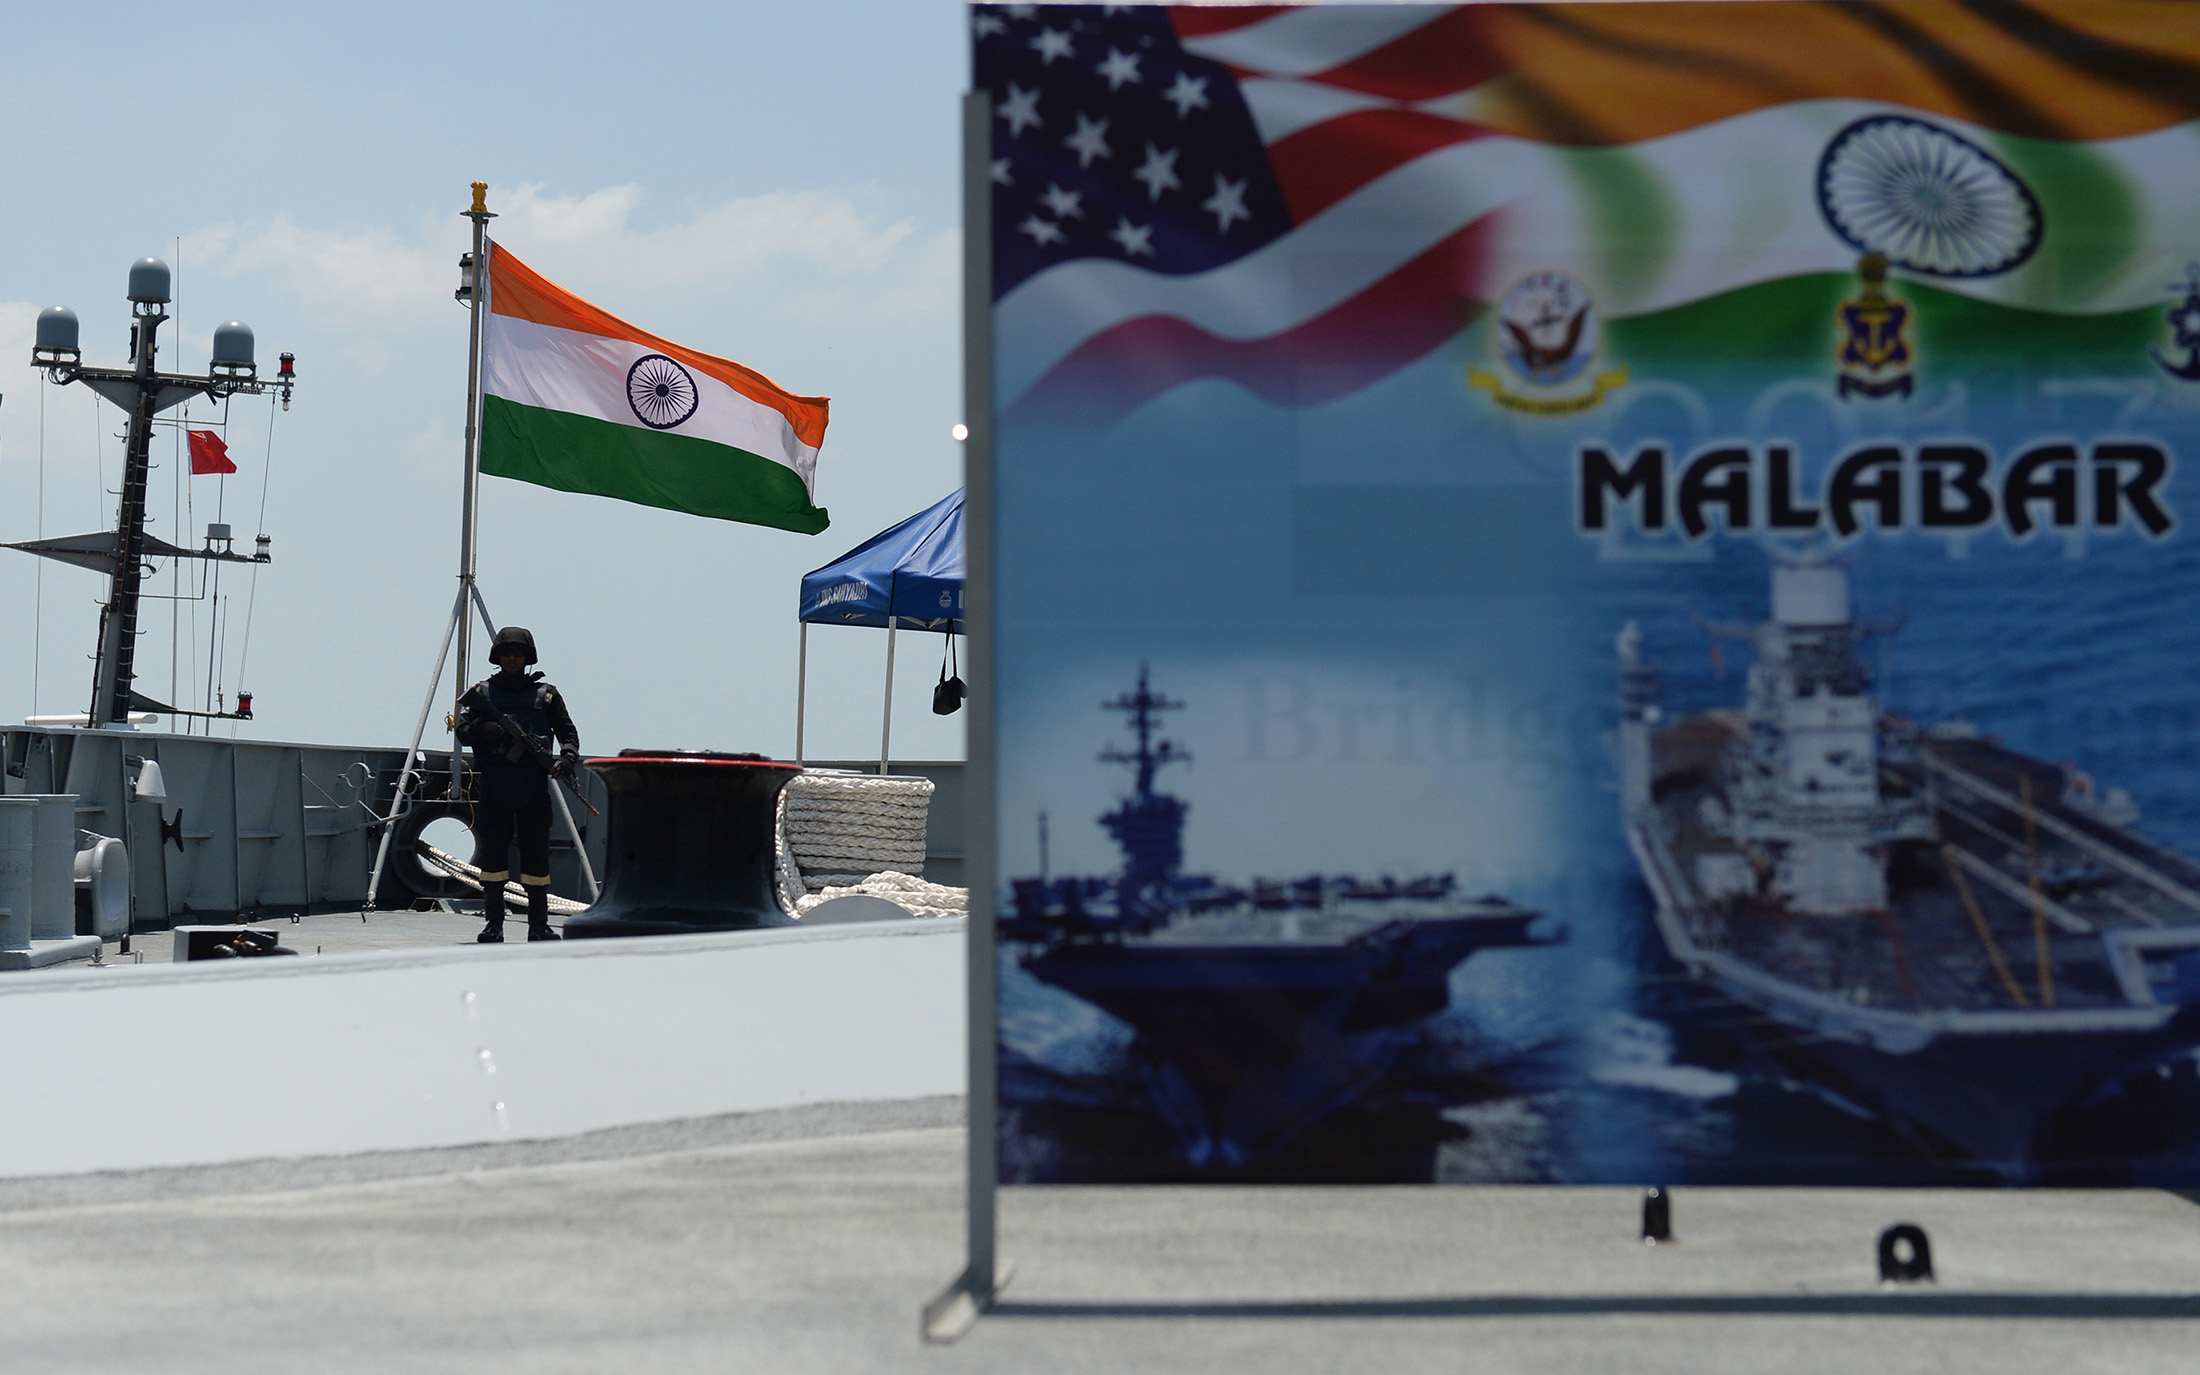 Malabar exercise reassures our commitment to a free, inclusive